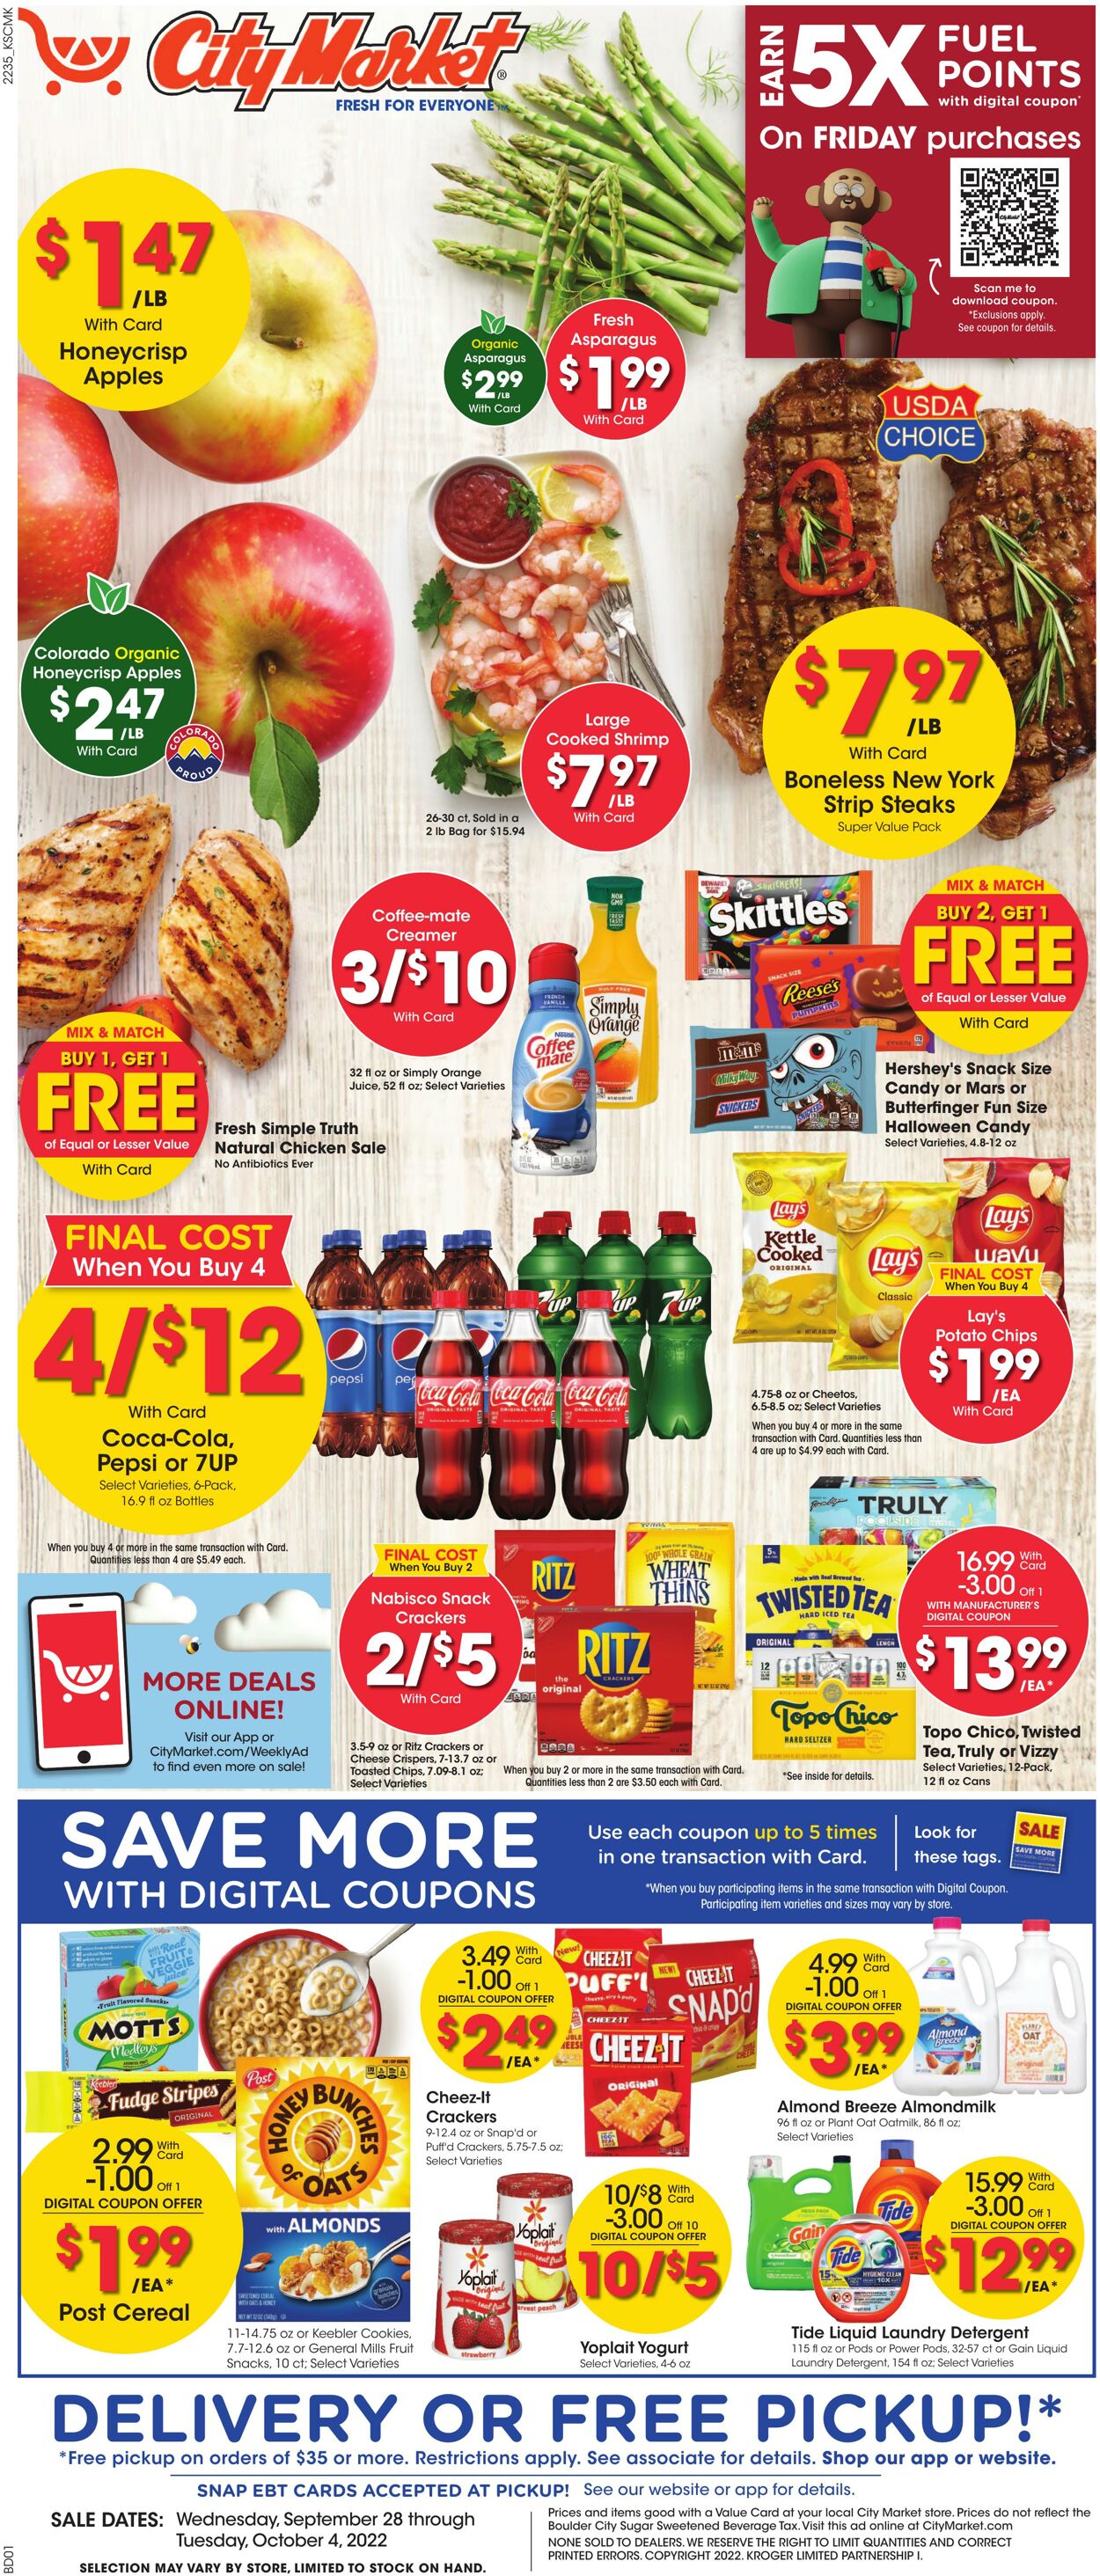 City Market Promotional weekly ads